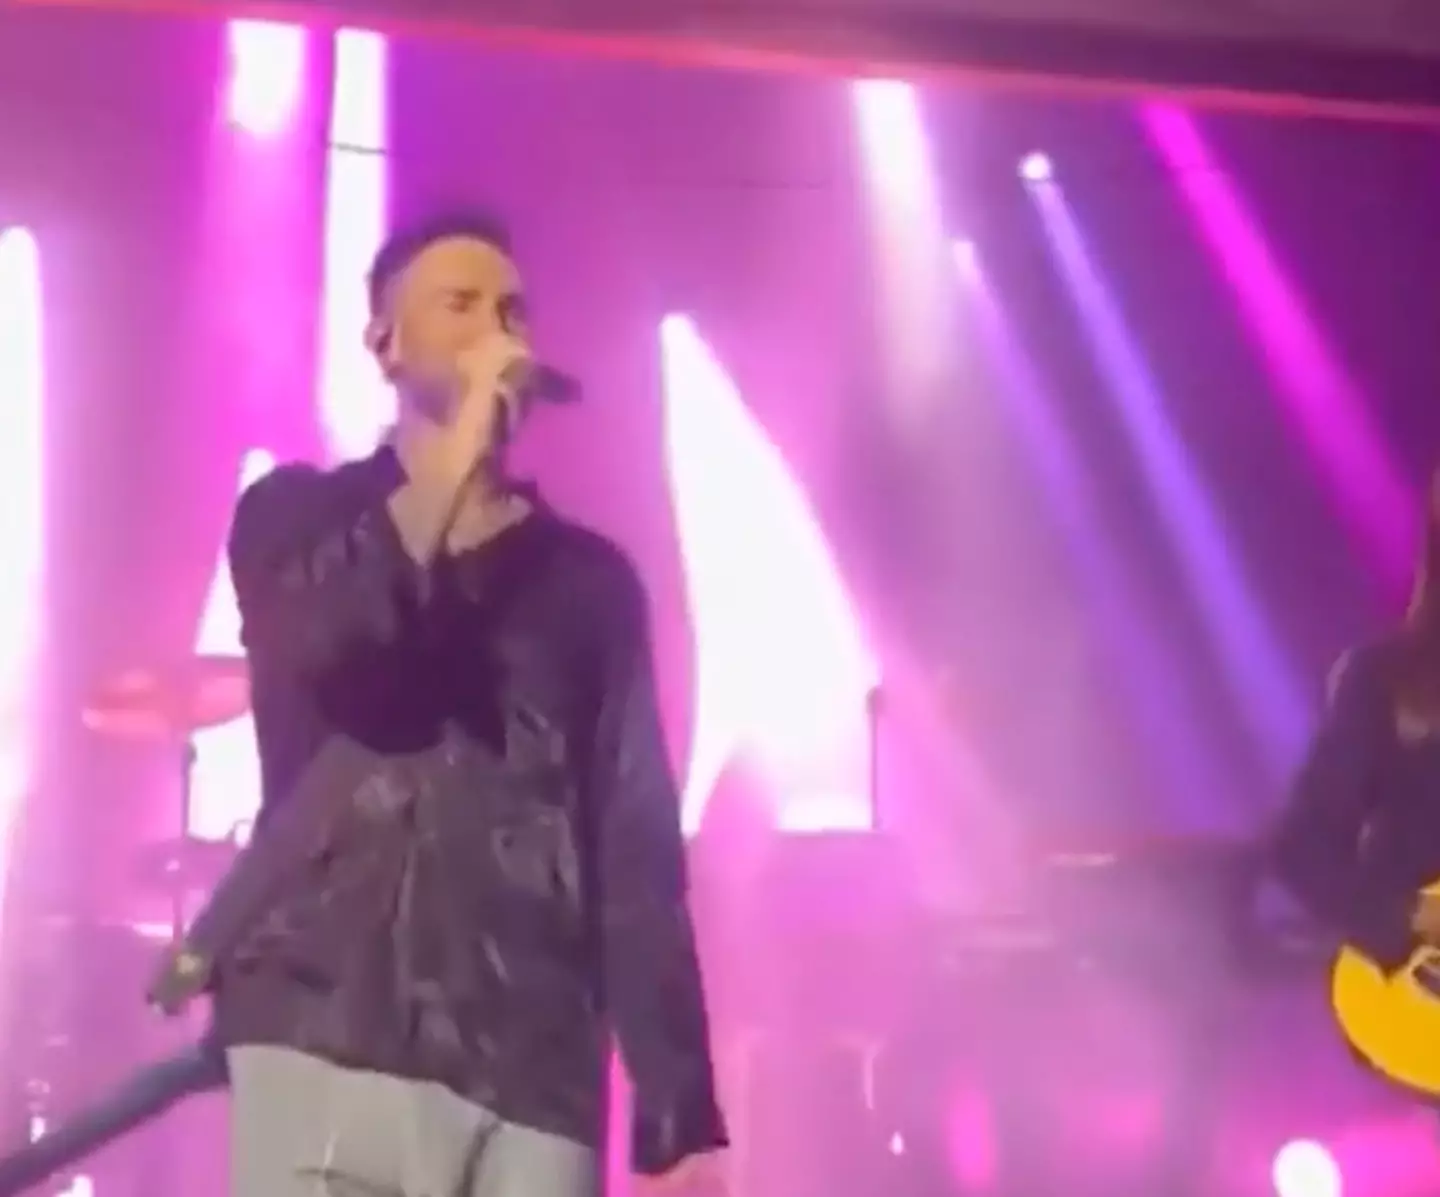 Maroon 5 performed live for the couple.